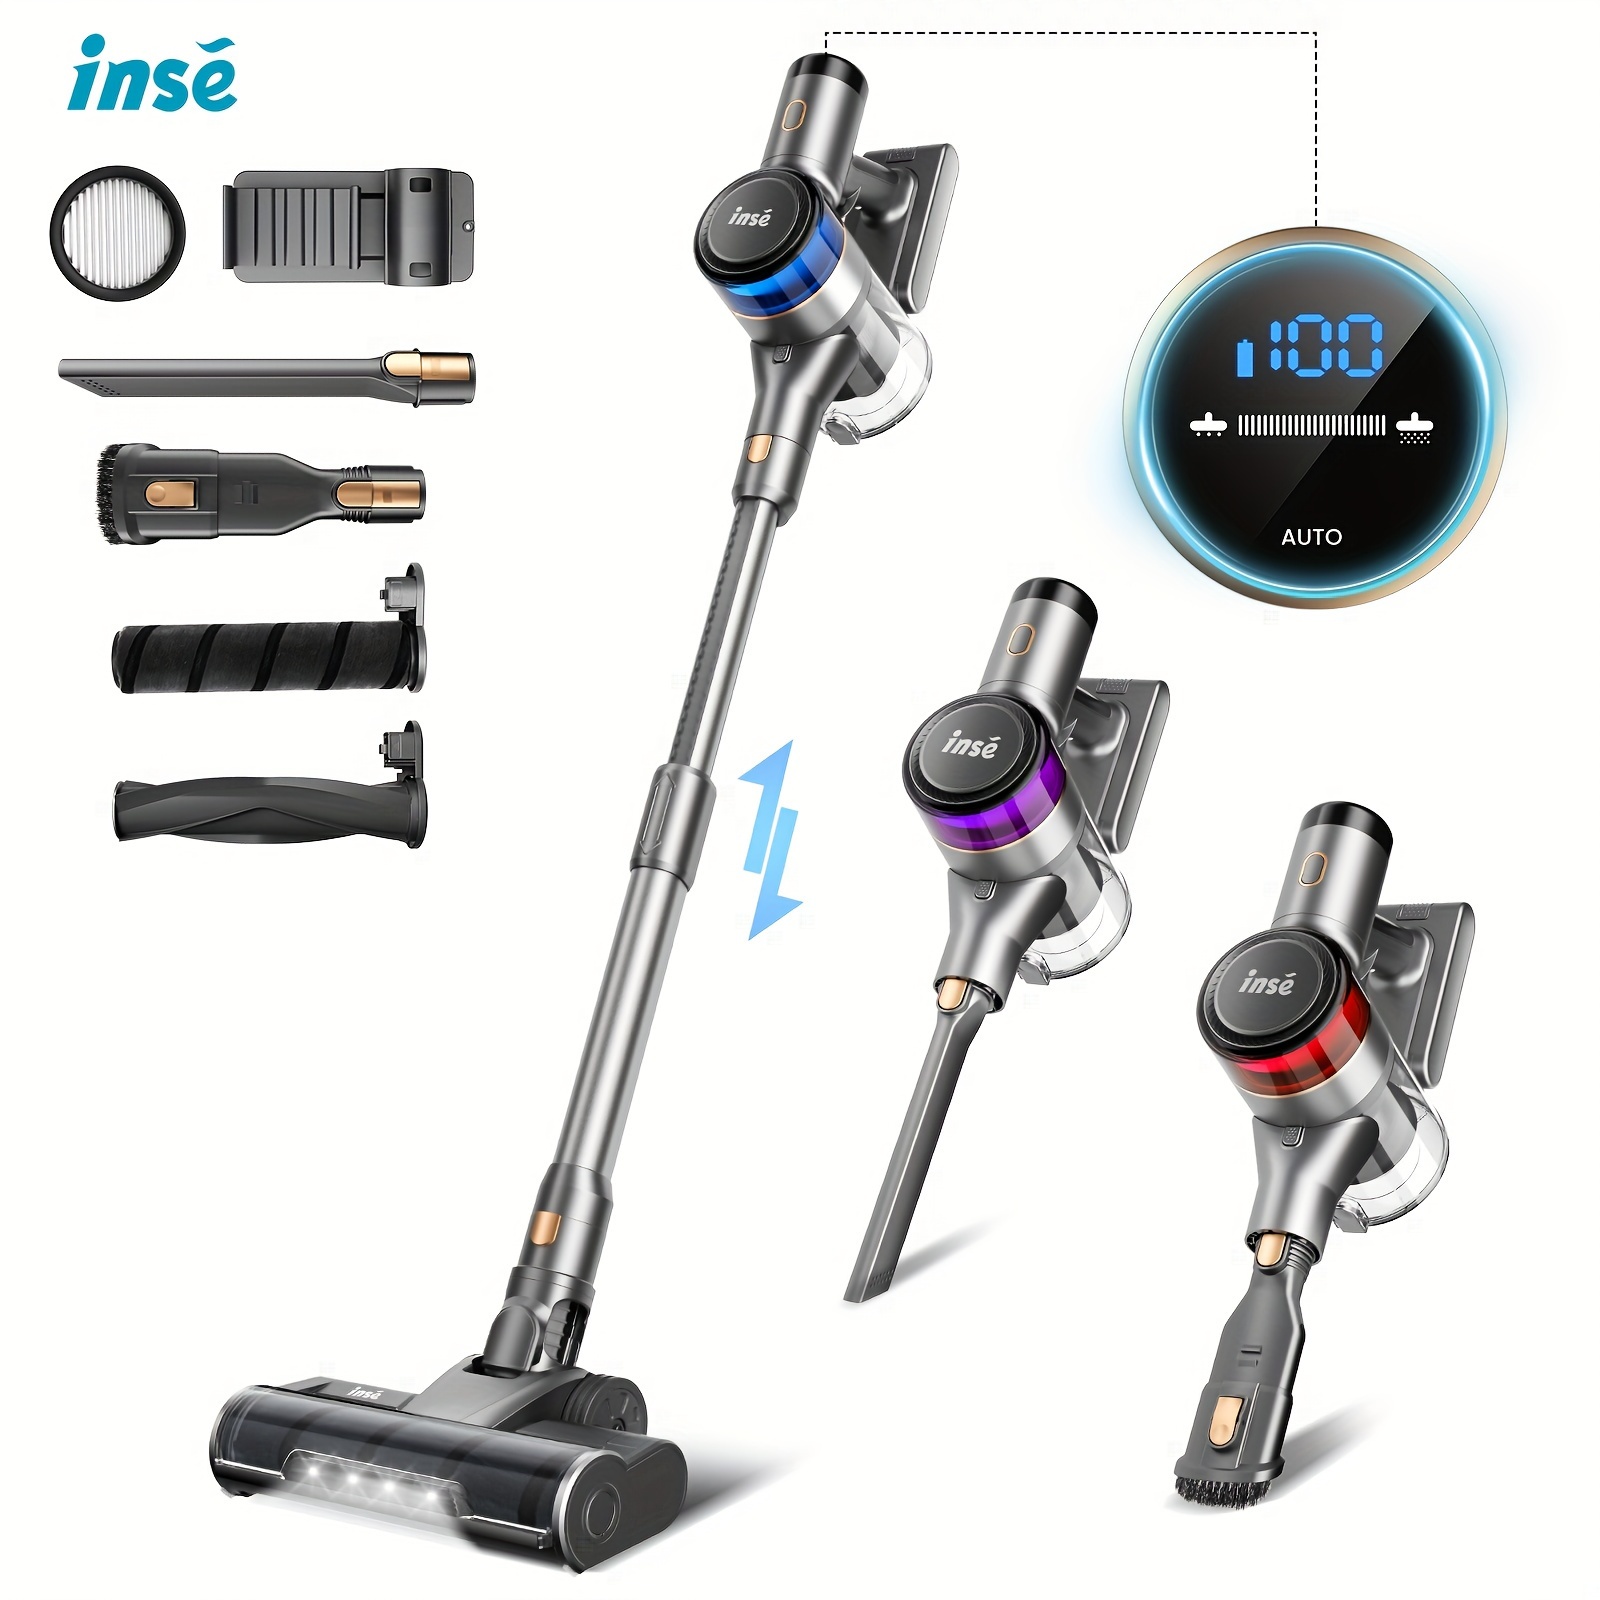 

Inse Cordless Vacuum Cleaner, 400w Stick Vacuumwith 30kpa Powerful Suction, 55min Runtime, Smarinduction Auto-adjustment, Rechargeable Cordlessvacuum For Carpet And Floor Pet Hair